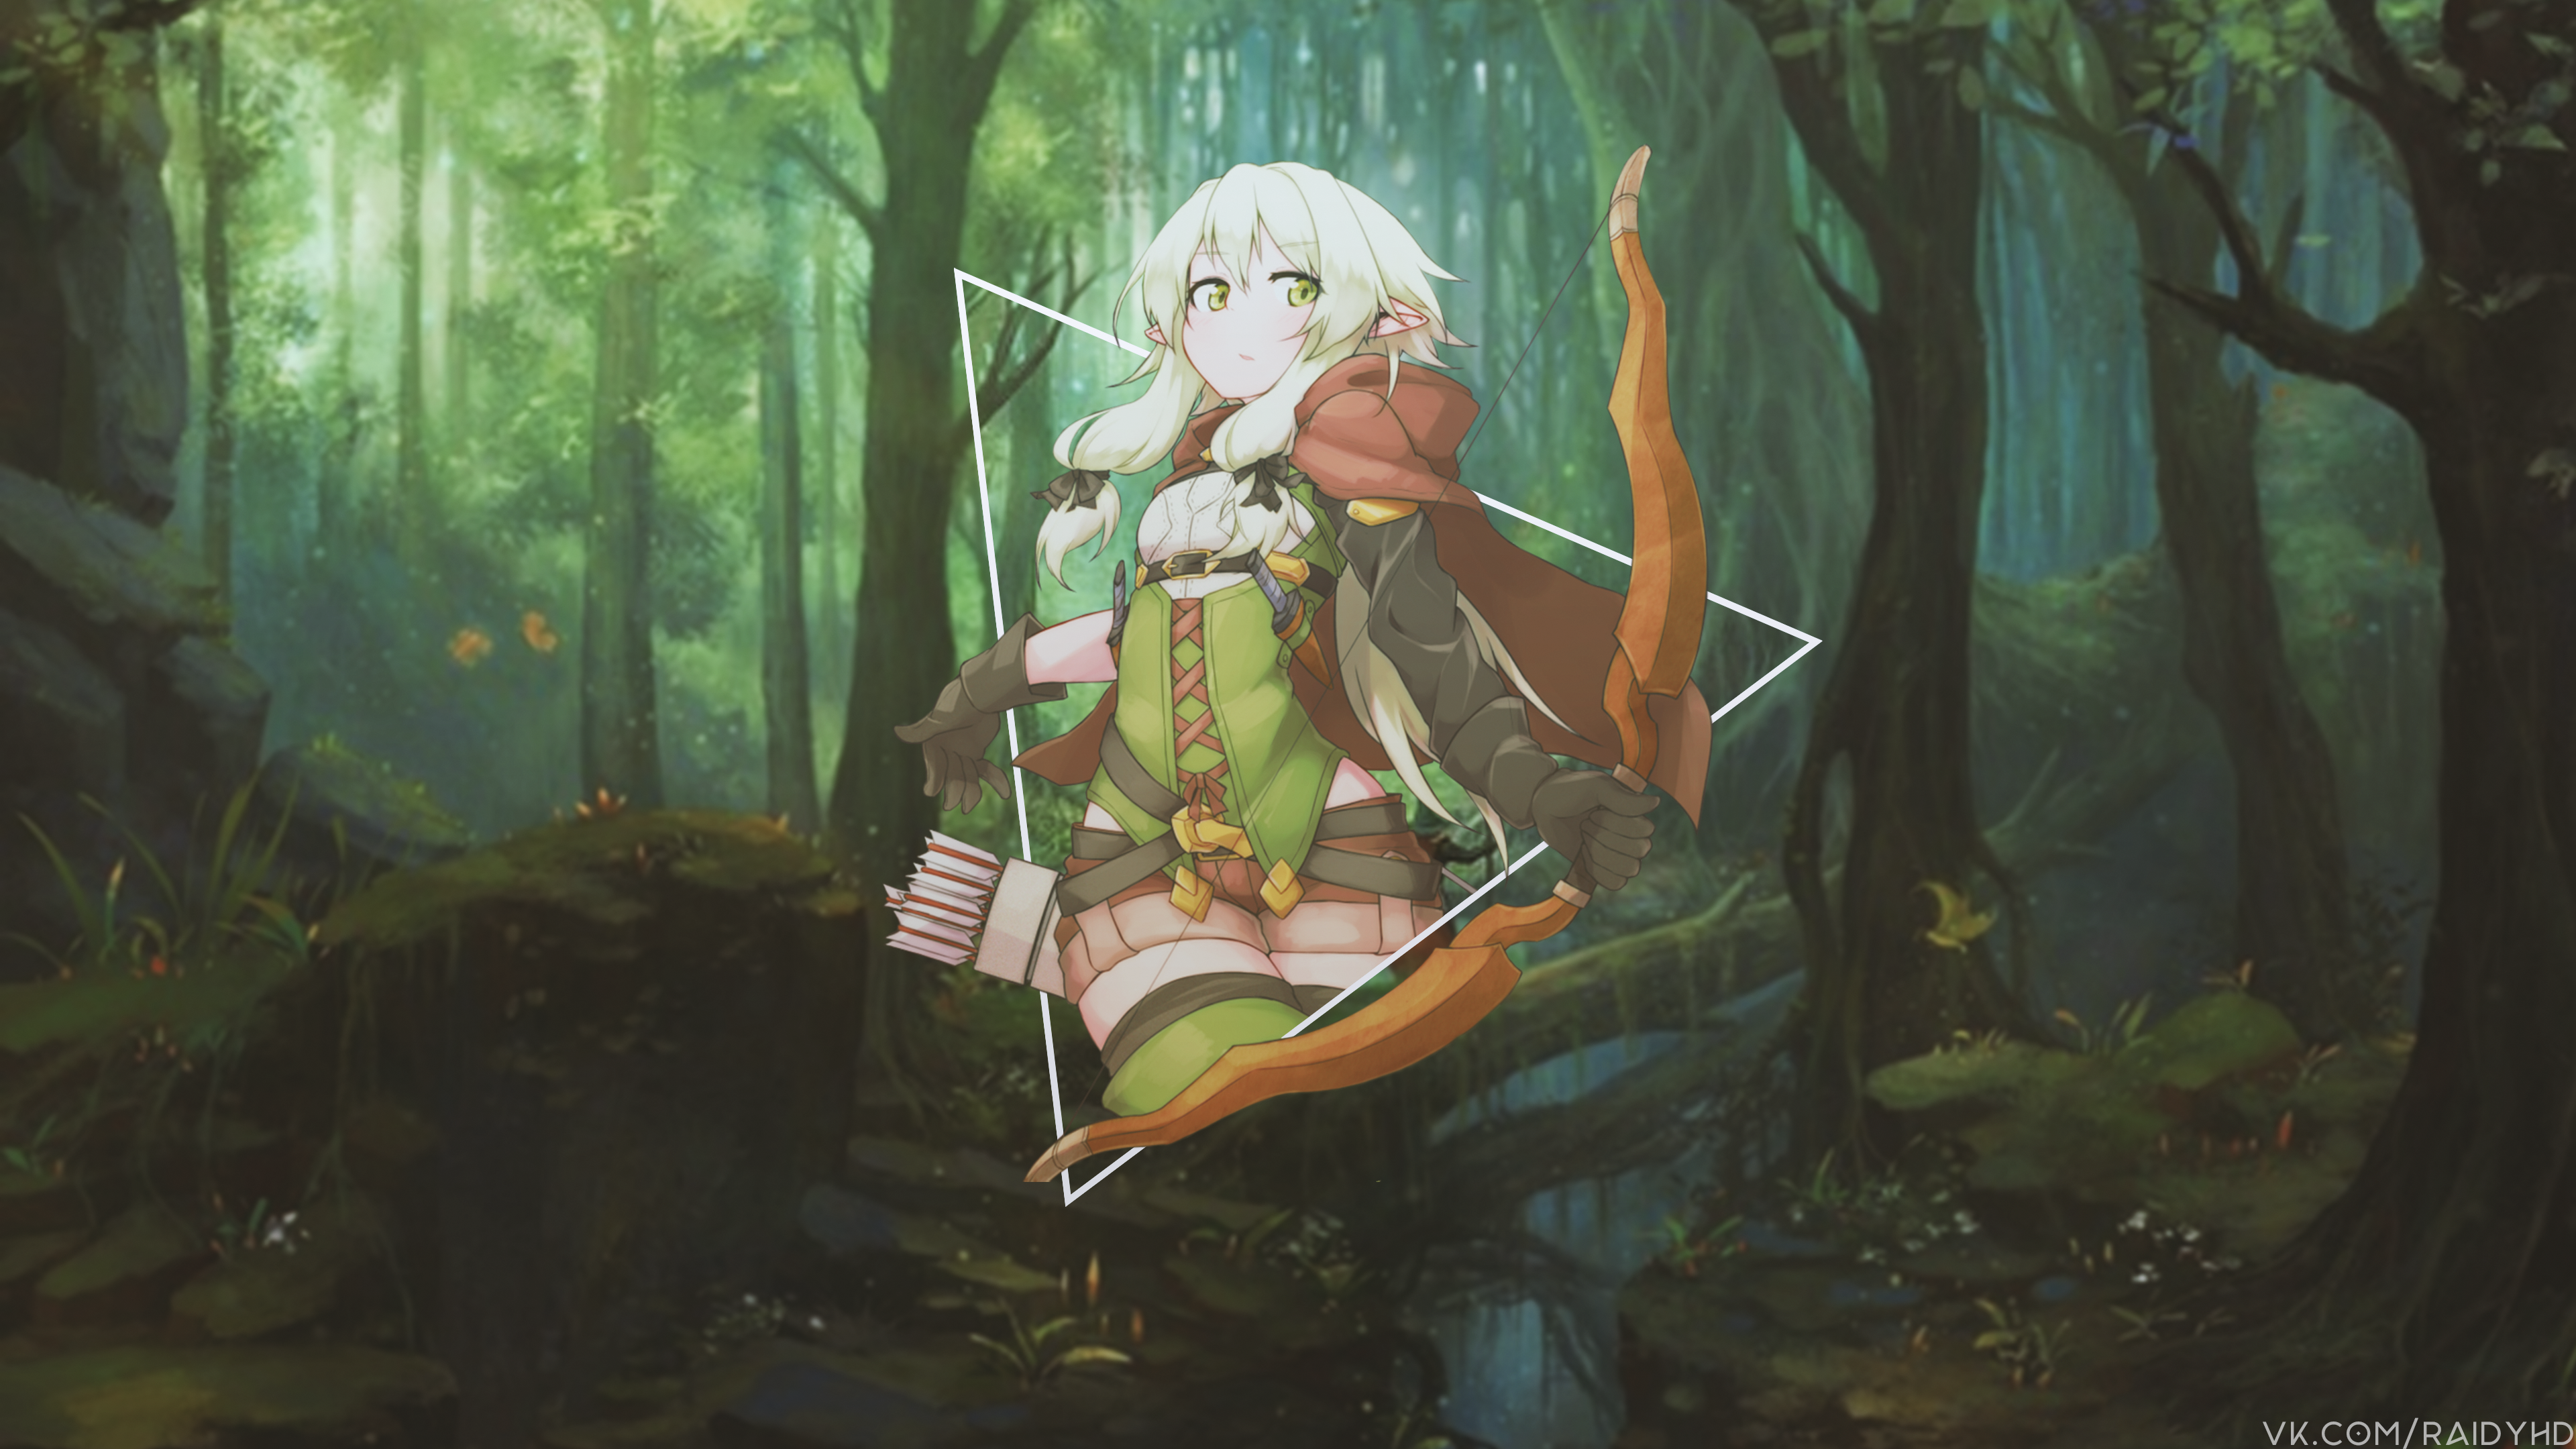 Anime 3840x2160 anime anime girls picture-in-picture forest archer triangle fantasy girl bow Goblin Slayer High Elf Archer (Goblin Slayer)